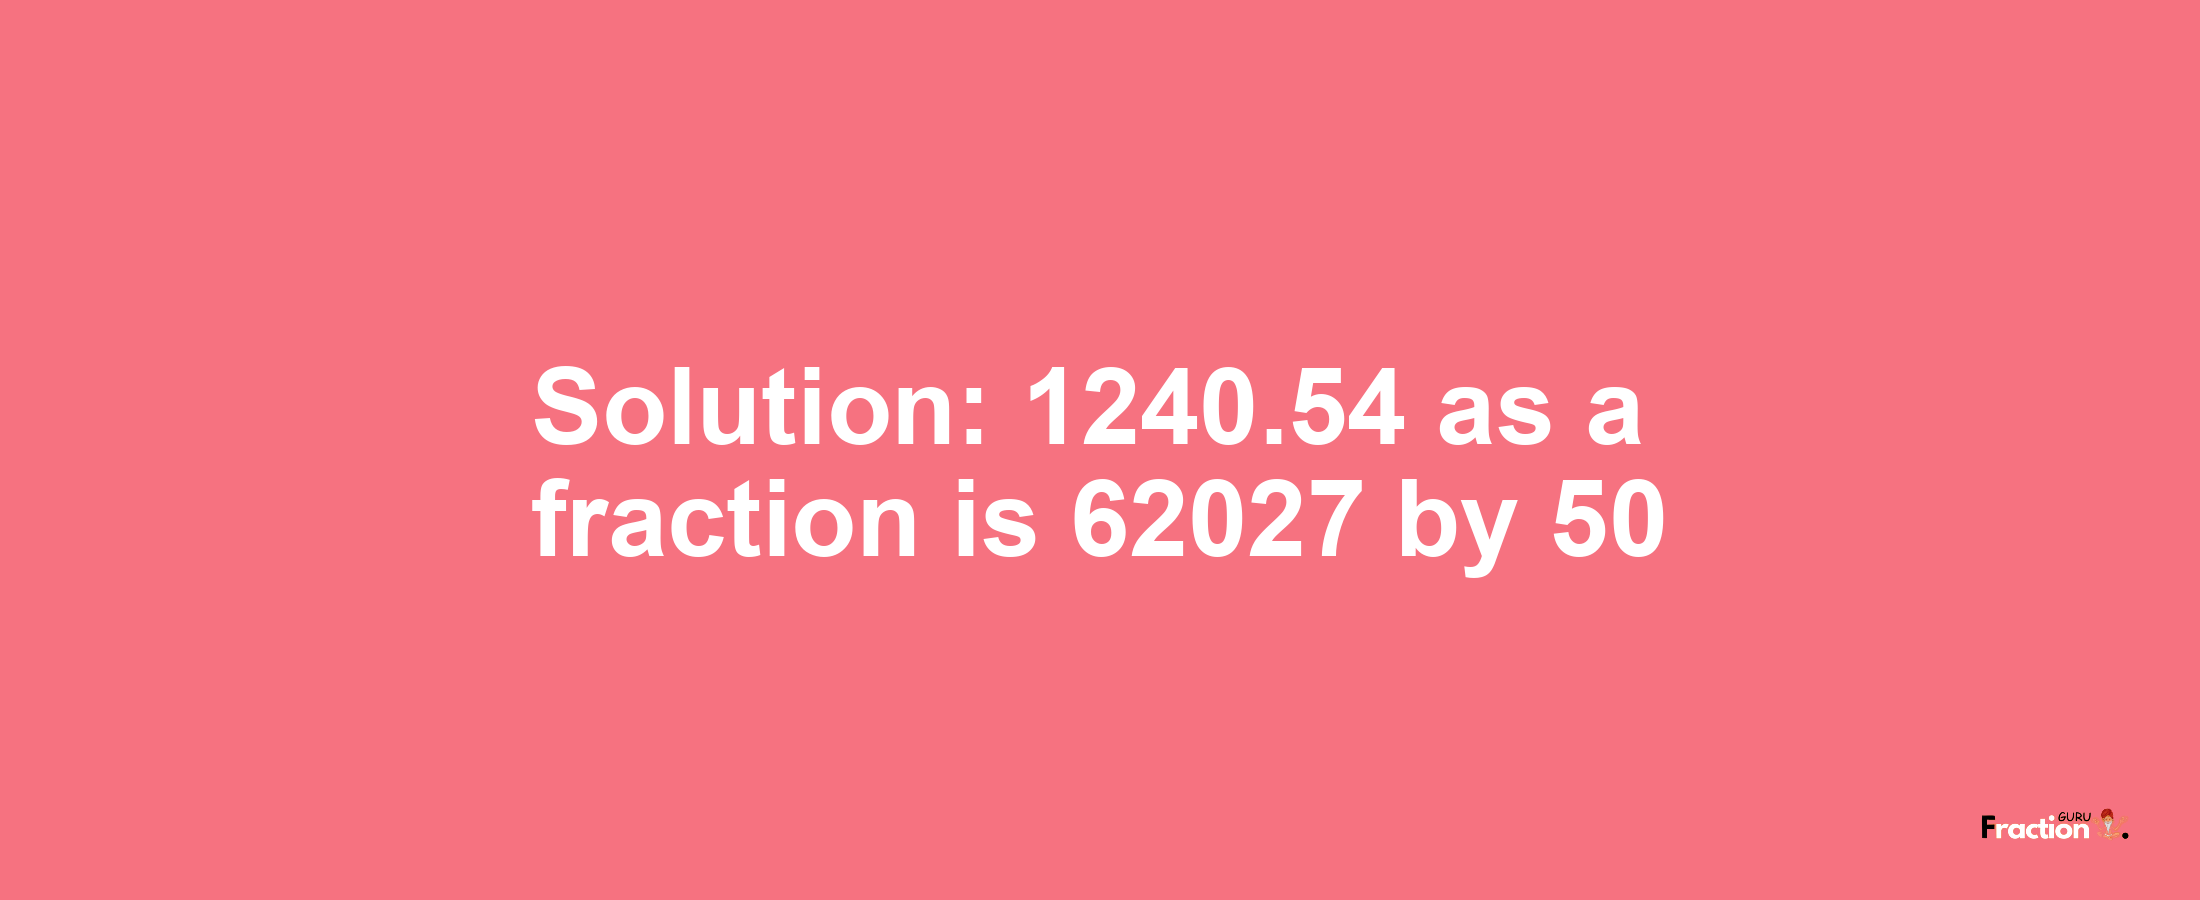 Solution:1240.54 as a fraction is 62027/50